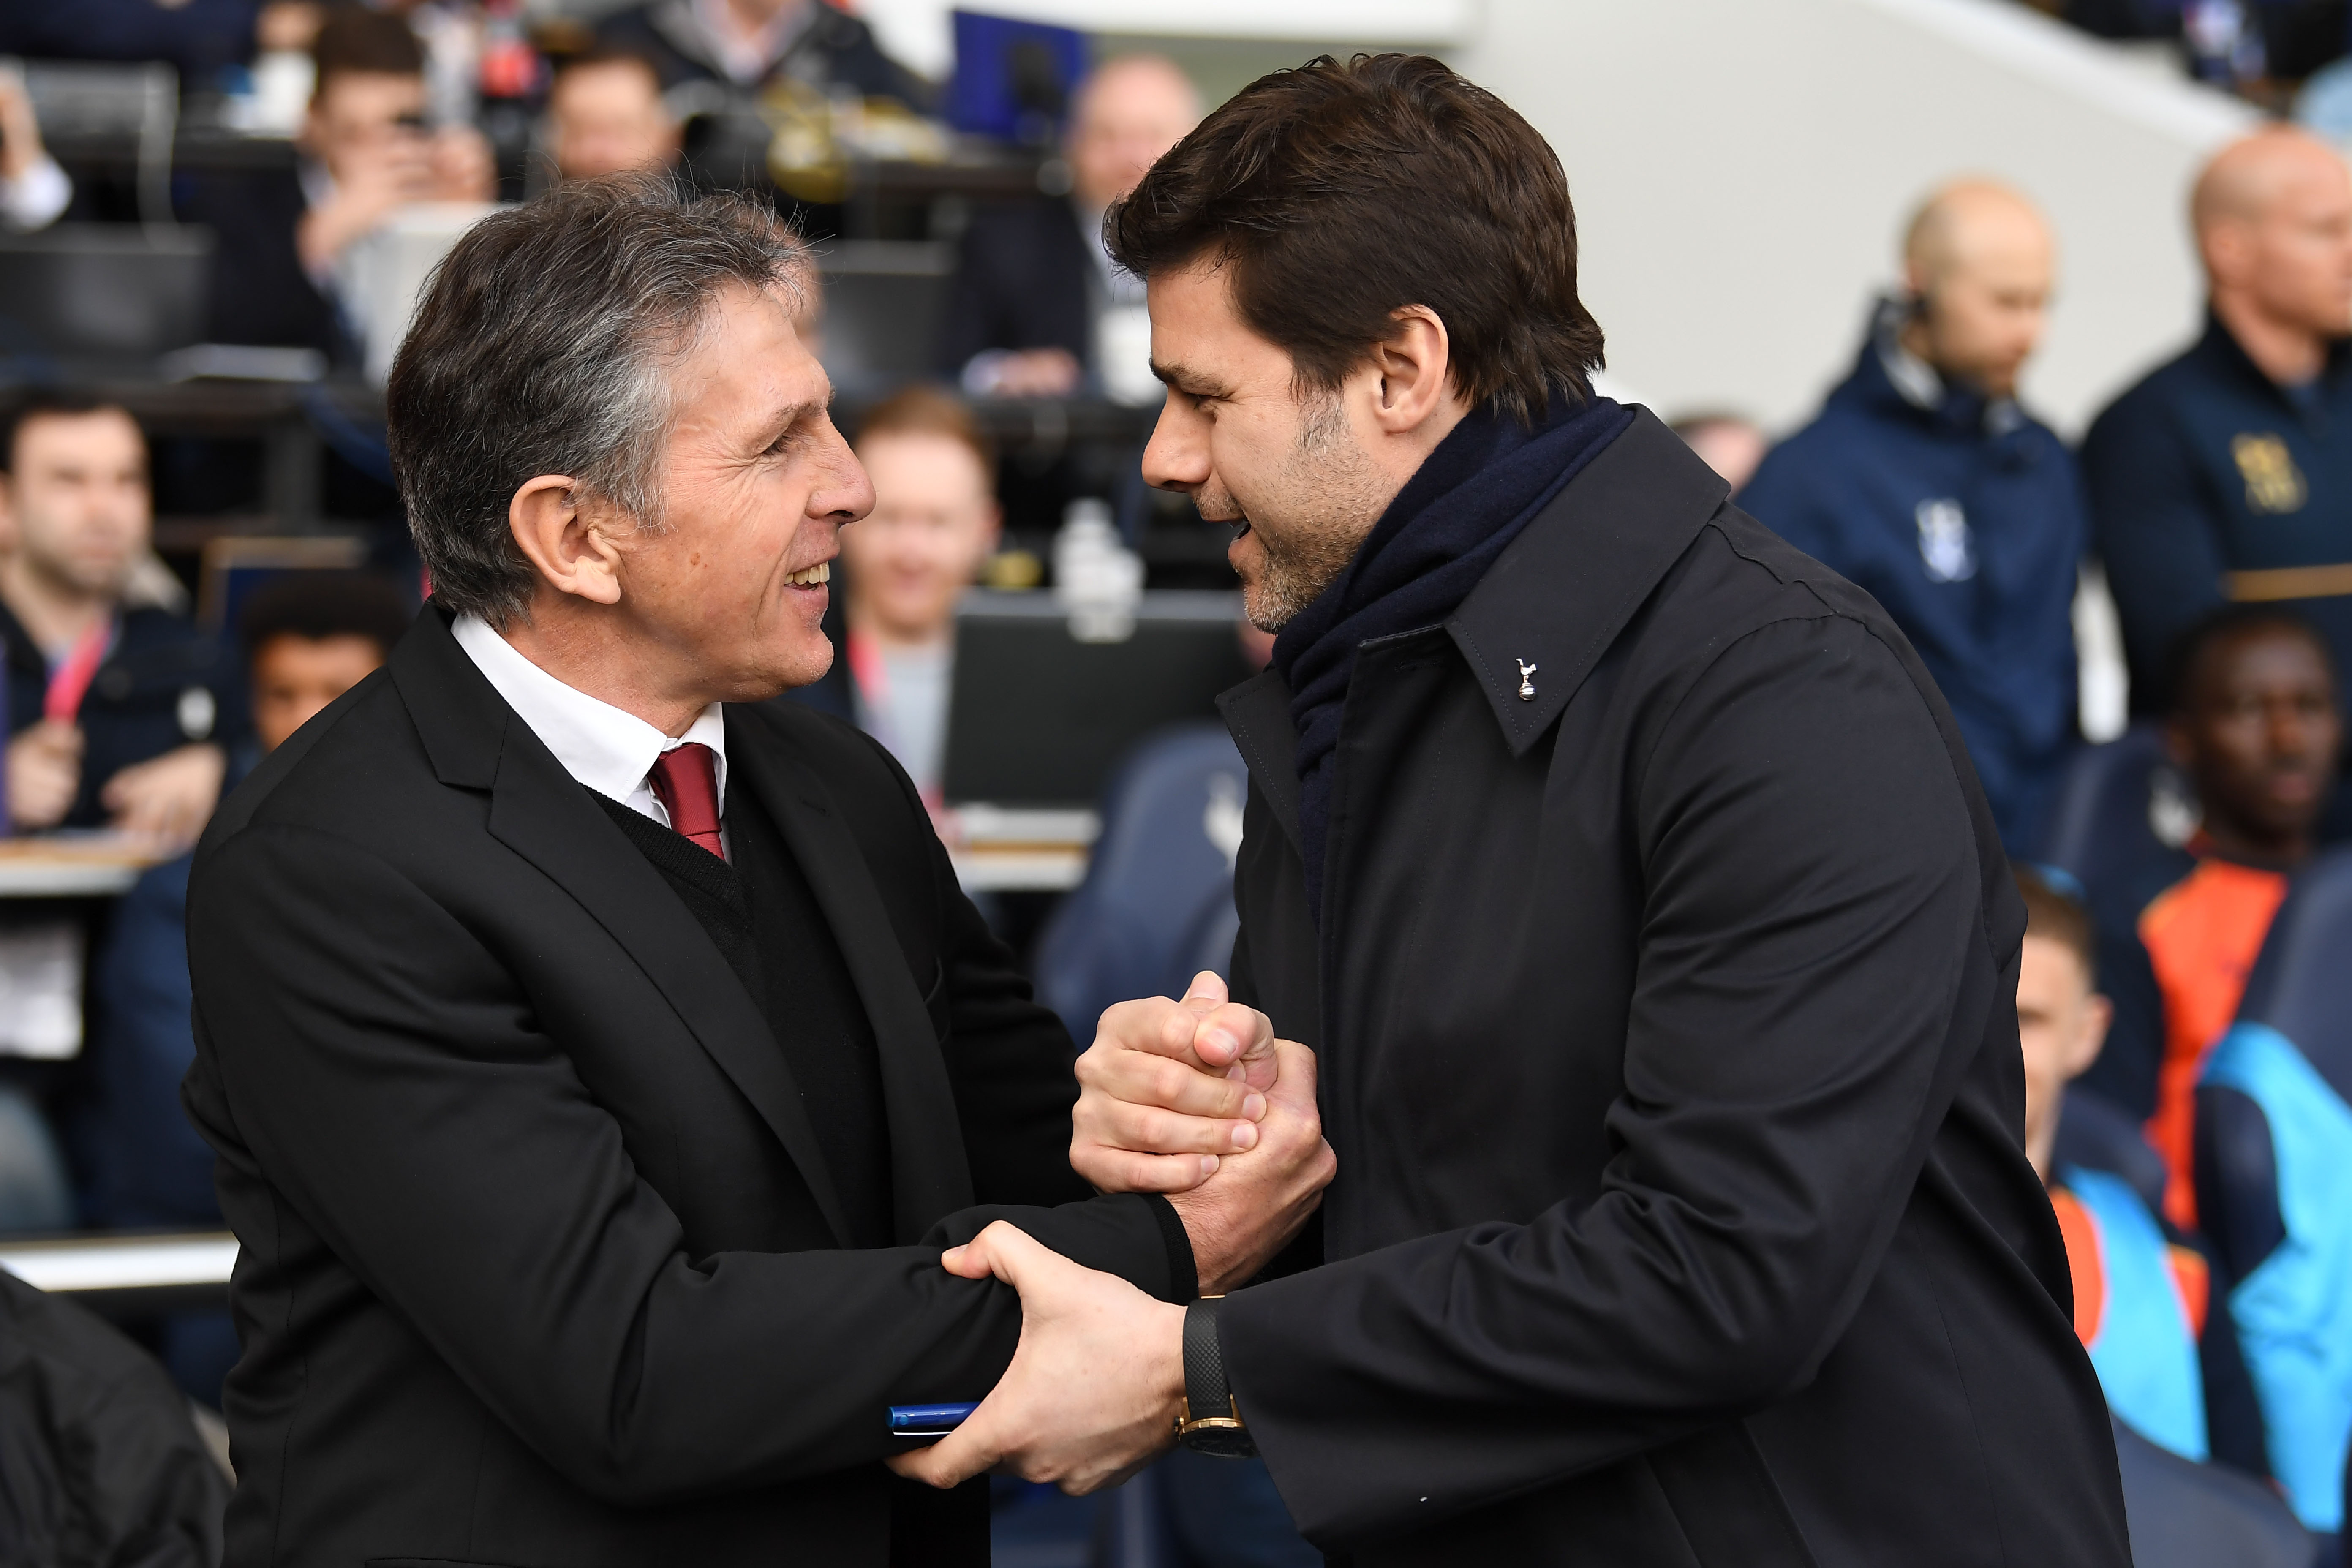 Southampton's French manager Claude Puel (L) greets Tottenham Hotspur's Argentinian head coach Mauricio Pochettino before the English Premier League football match between Tottenham Hotspur and Southampton at White Hart Lane in London, on March 19, 2017. / AFP PHOTO / Justin TALLIS / RESTRICTED TO EDITORIAL USE. No use with unauthorized audio, video, data, fixture lists, club/league logos or 'live' services. Online in-match use limited to 75 images, no video emulation. No use in betting, games or single club/league/player publications.  /         (Photo credit should read JUSTIN TALLIS/AFP/Getty Images)